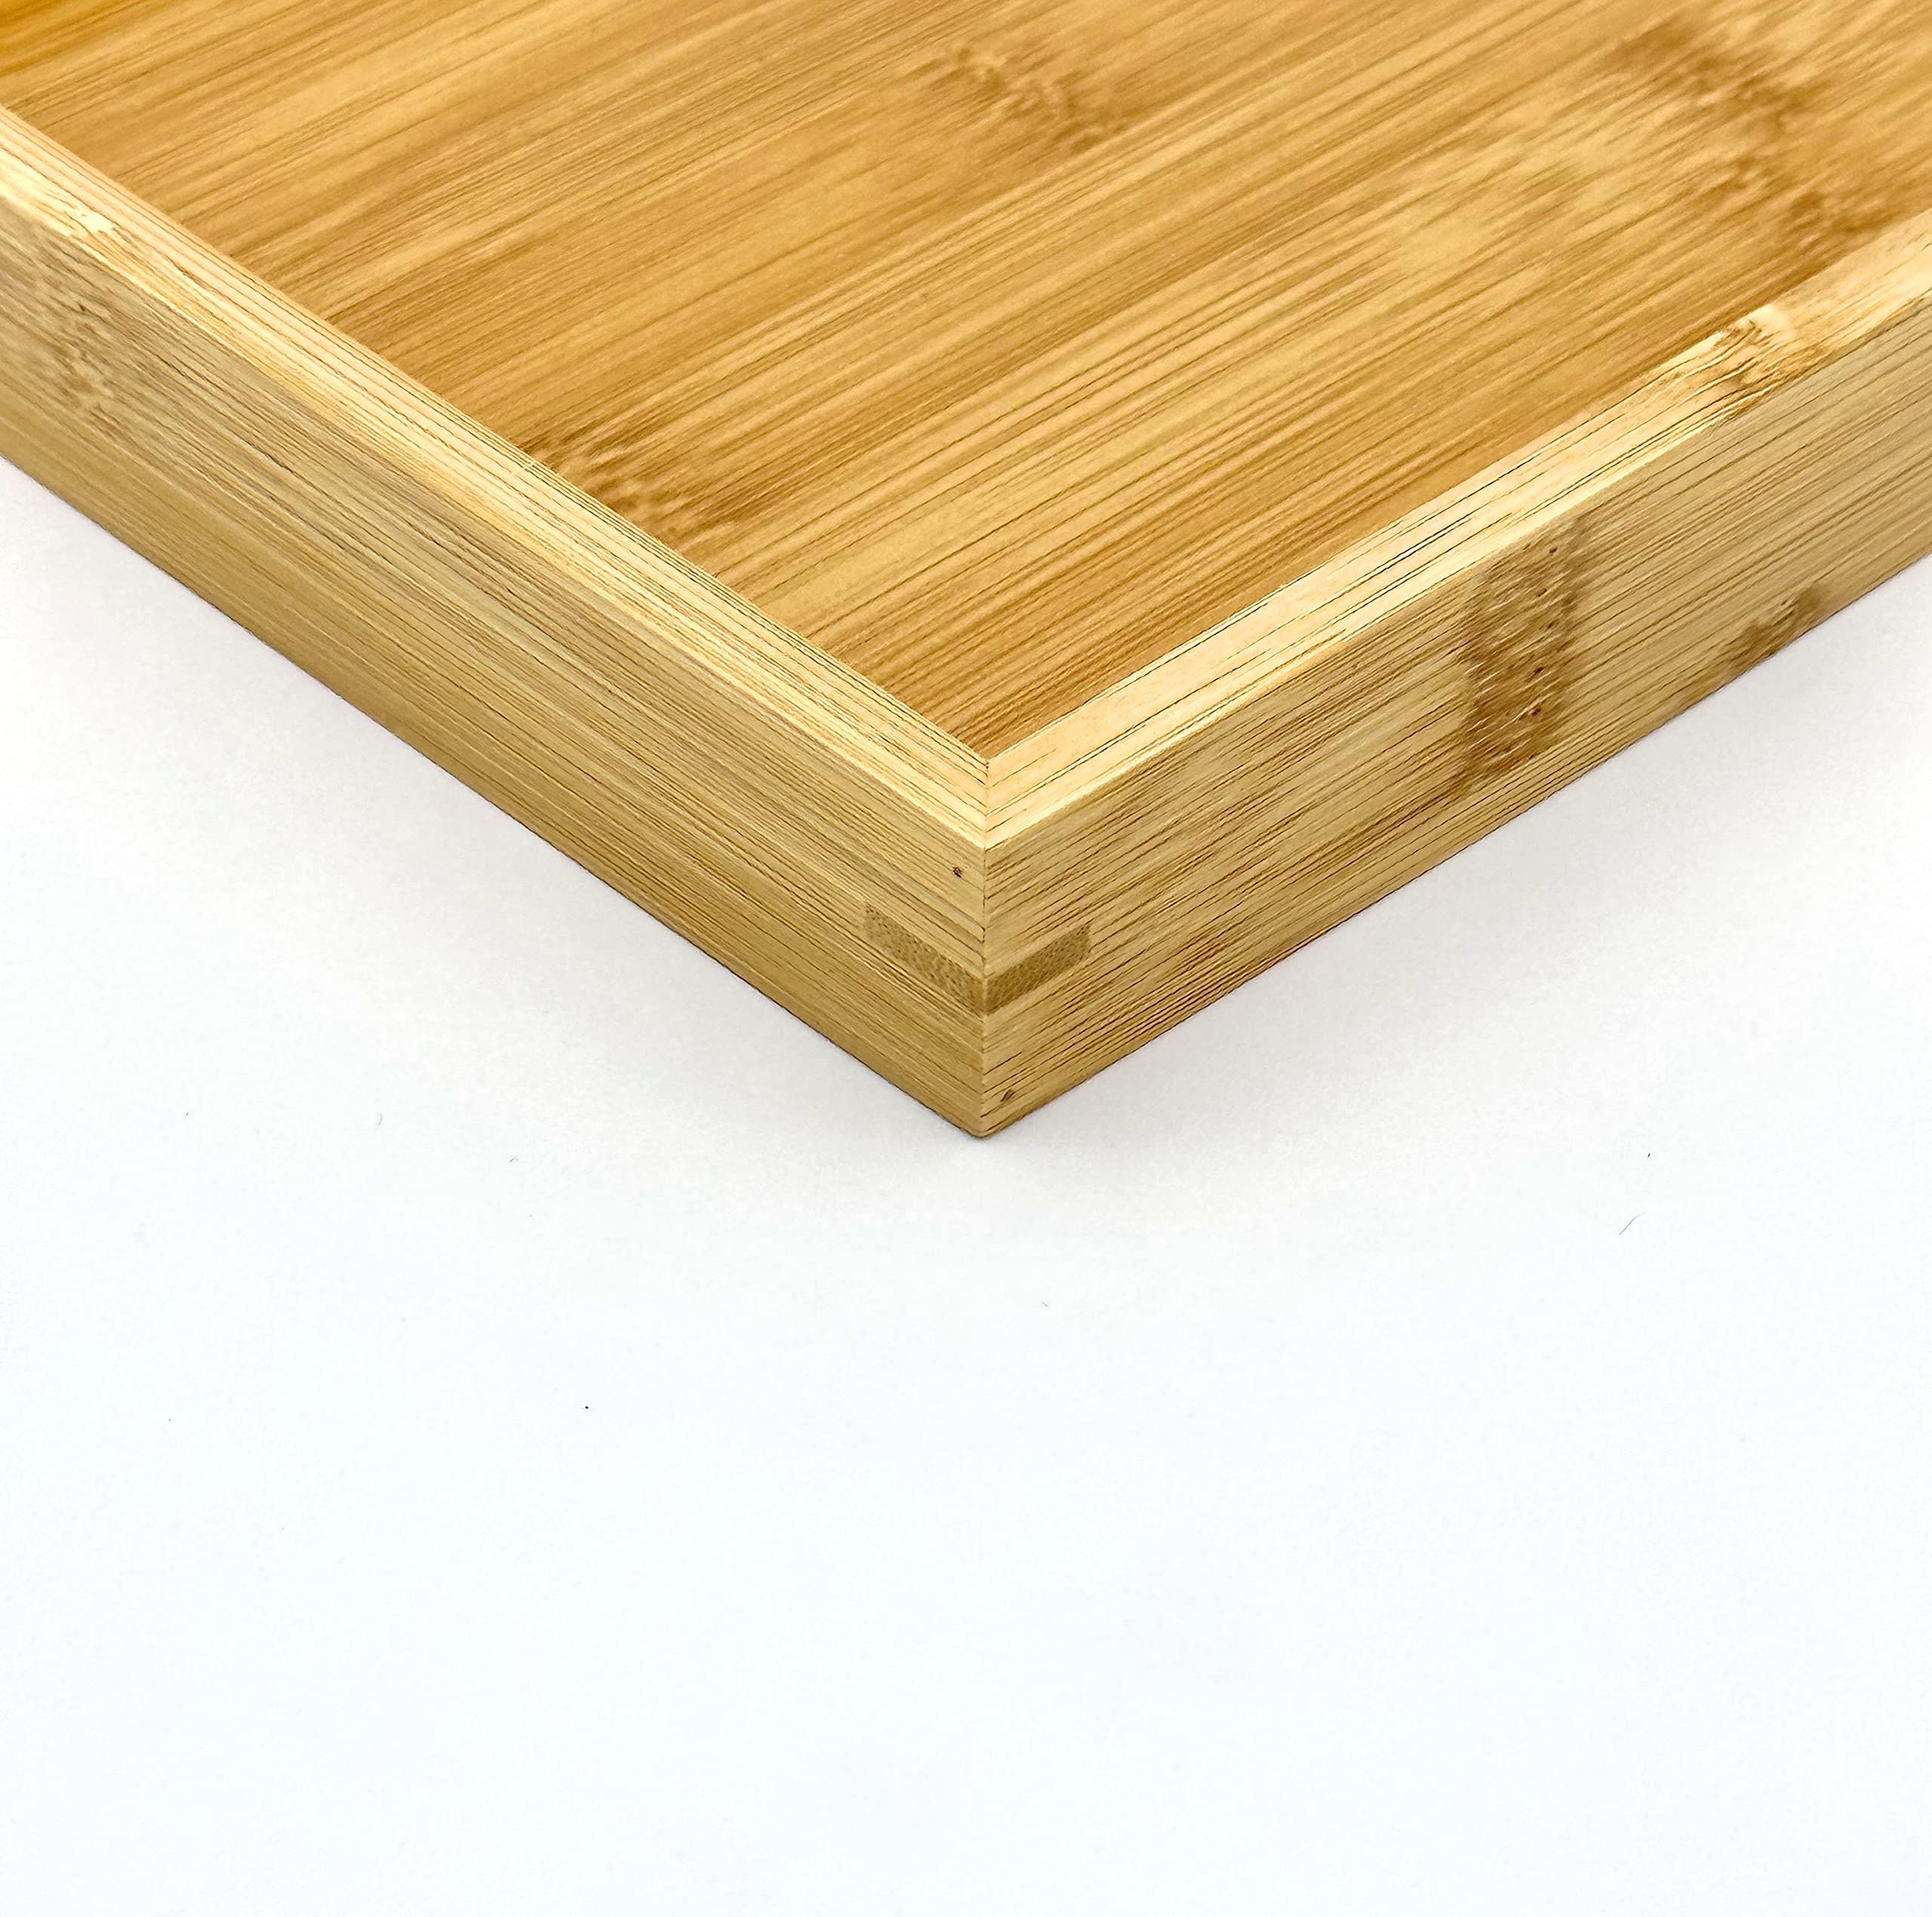 Bam & Boo - Natural Bamboo Serving Tray Modern Rectangular - for Food, Drinks, Decor, Vanity in Home, Kitchen, Bathroom, Coffee Table, Bed(Medium, 13” x 9" x 1.2")